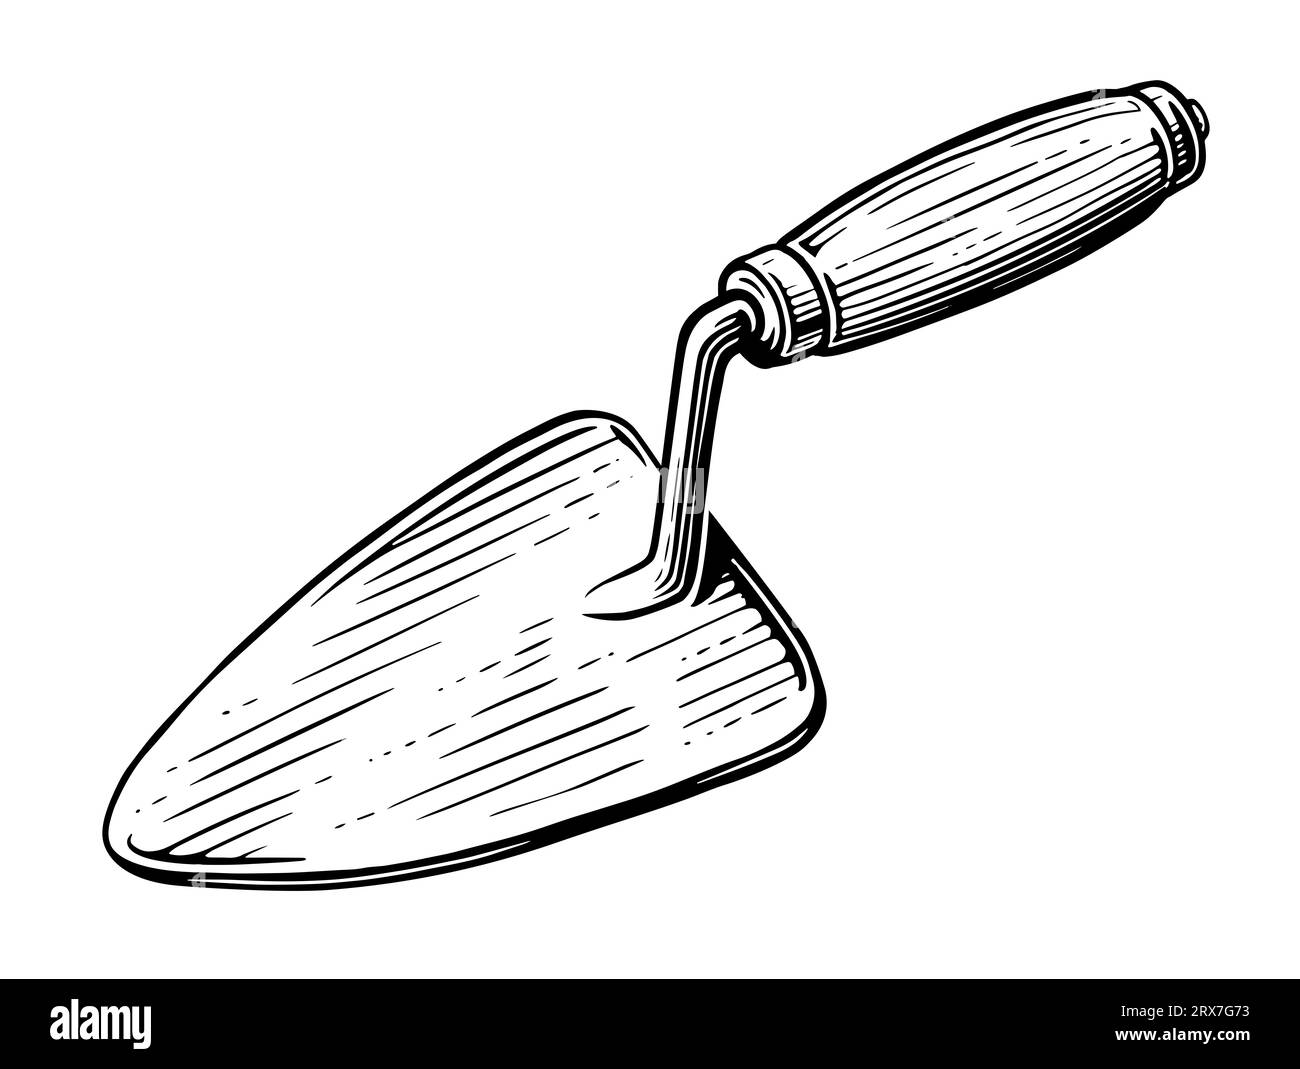 Construction trowel with wooden handle. Working tool for housework or repairs. Sketch illustration Stock Photo